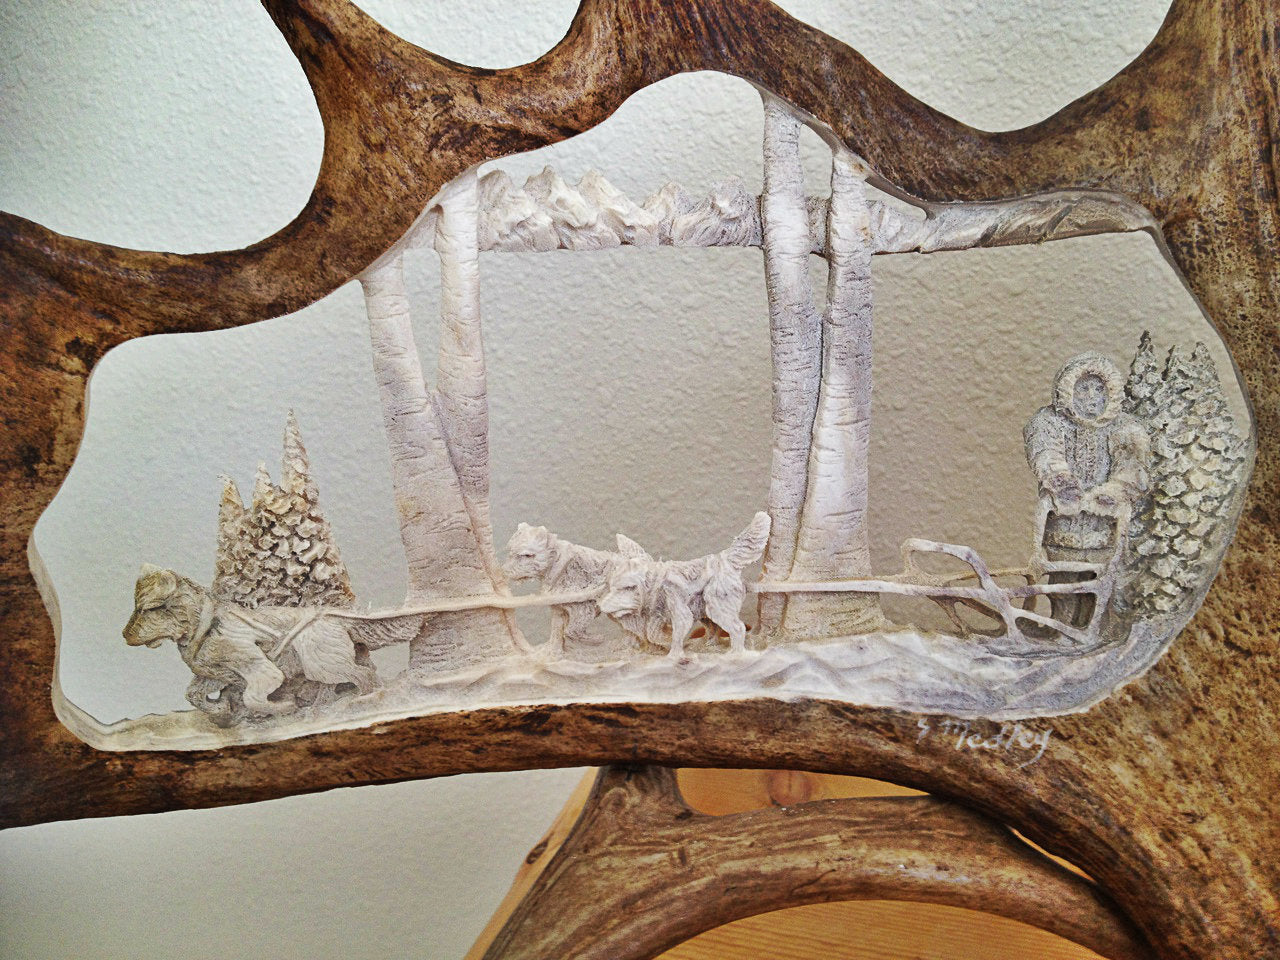 Iditarod Sled Dogs Moose Antler Carving